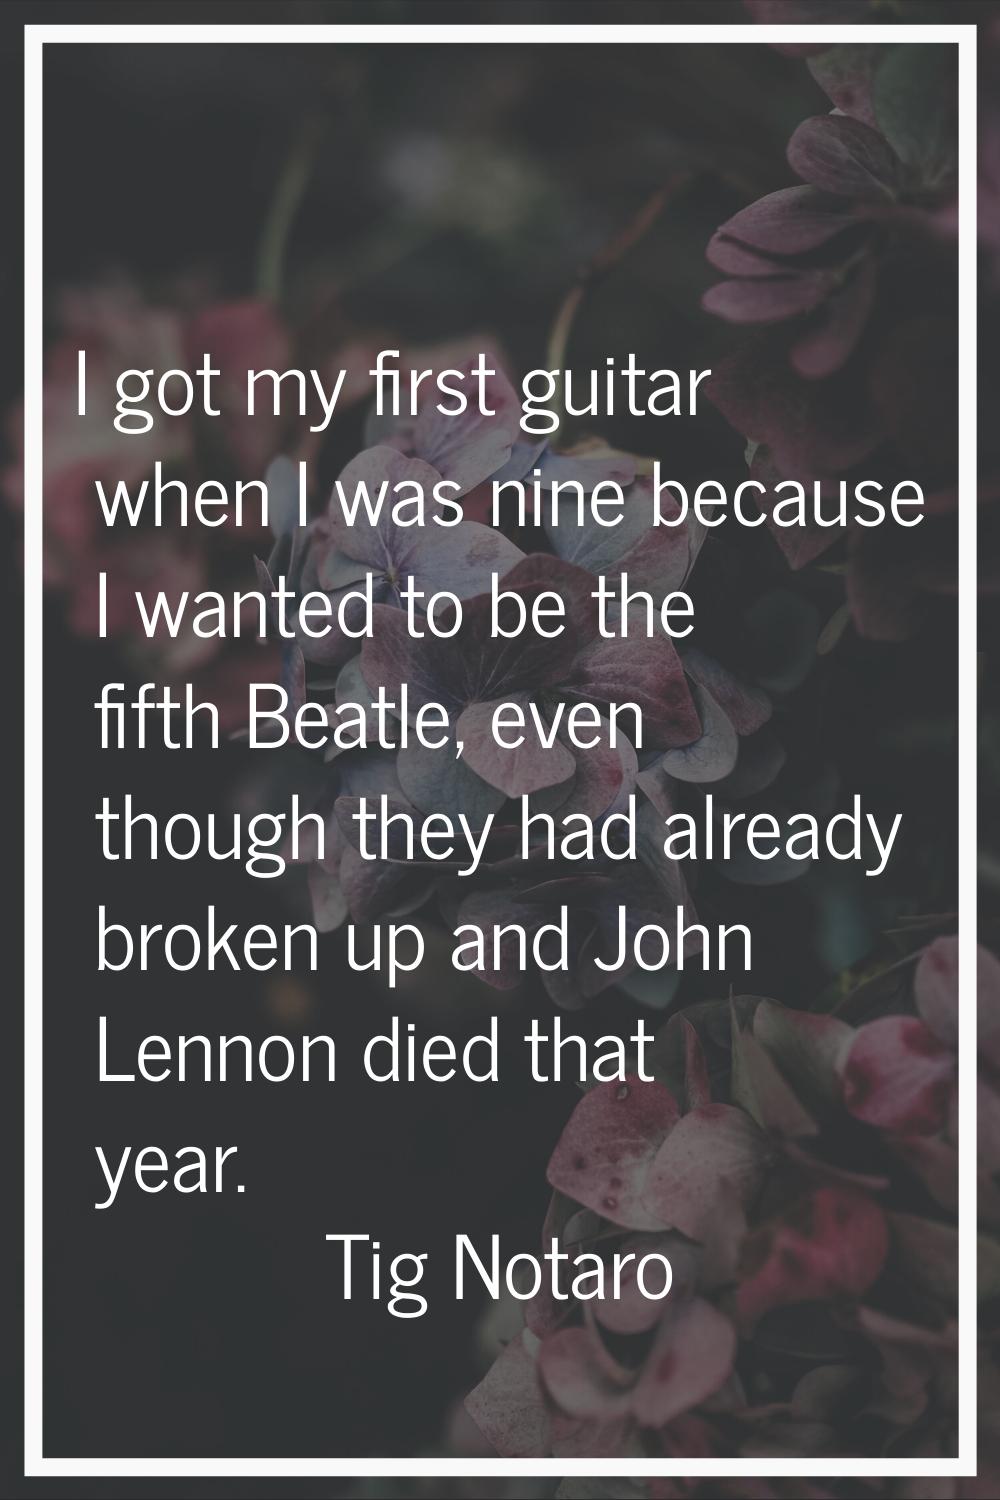 I got my first guitar when I was nine because I wanted to be the fifth Beatle, even though they had